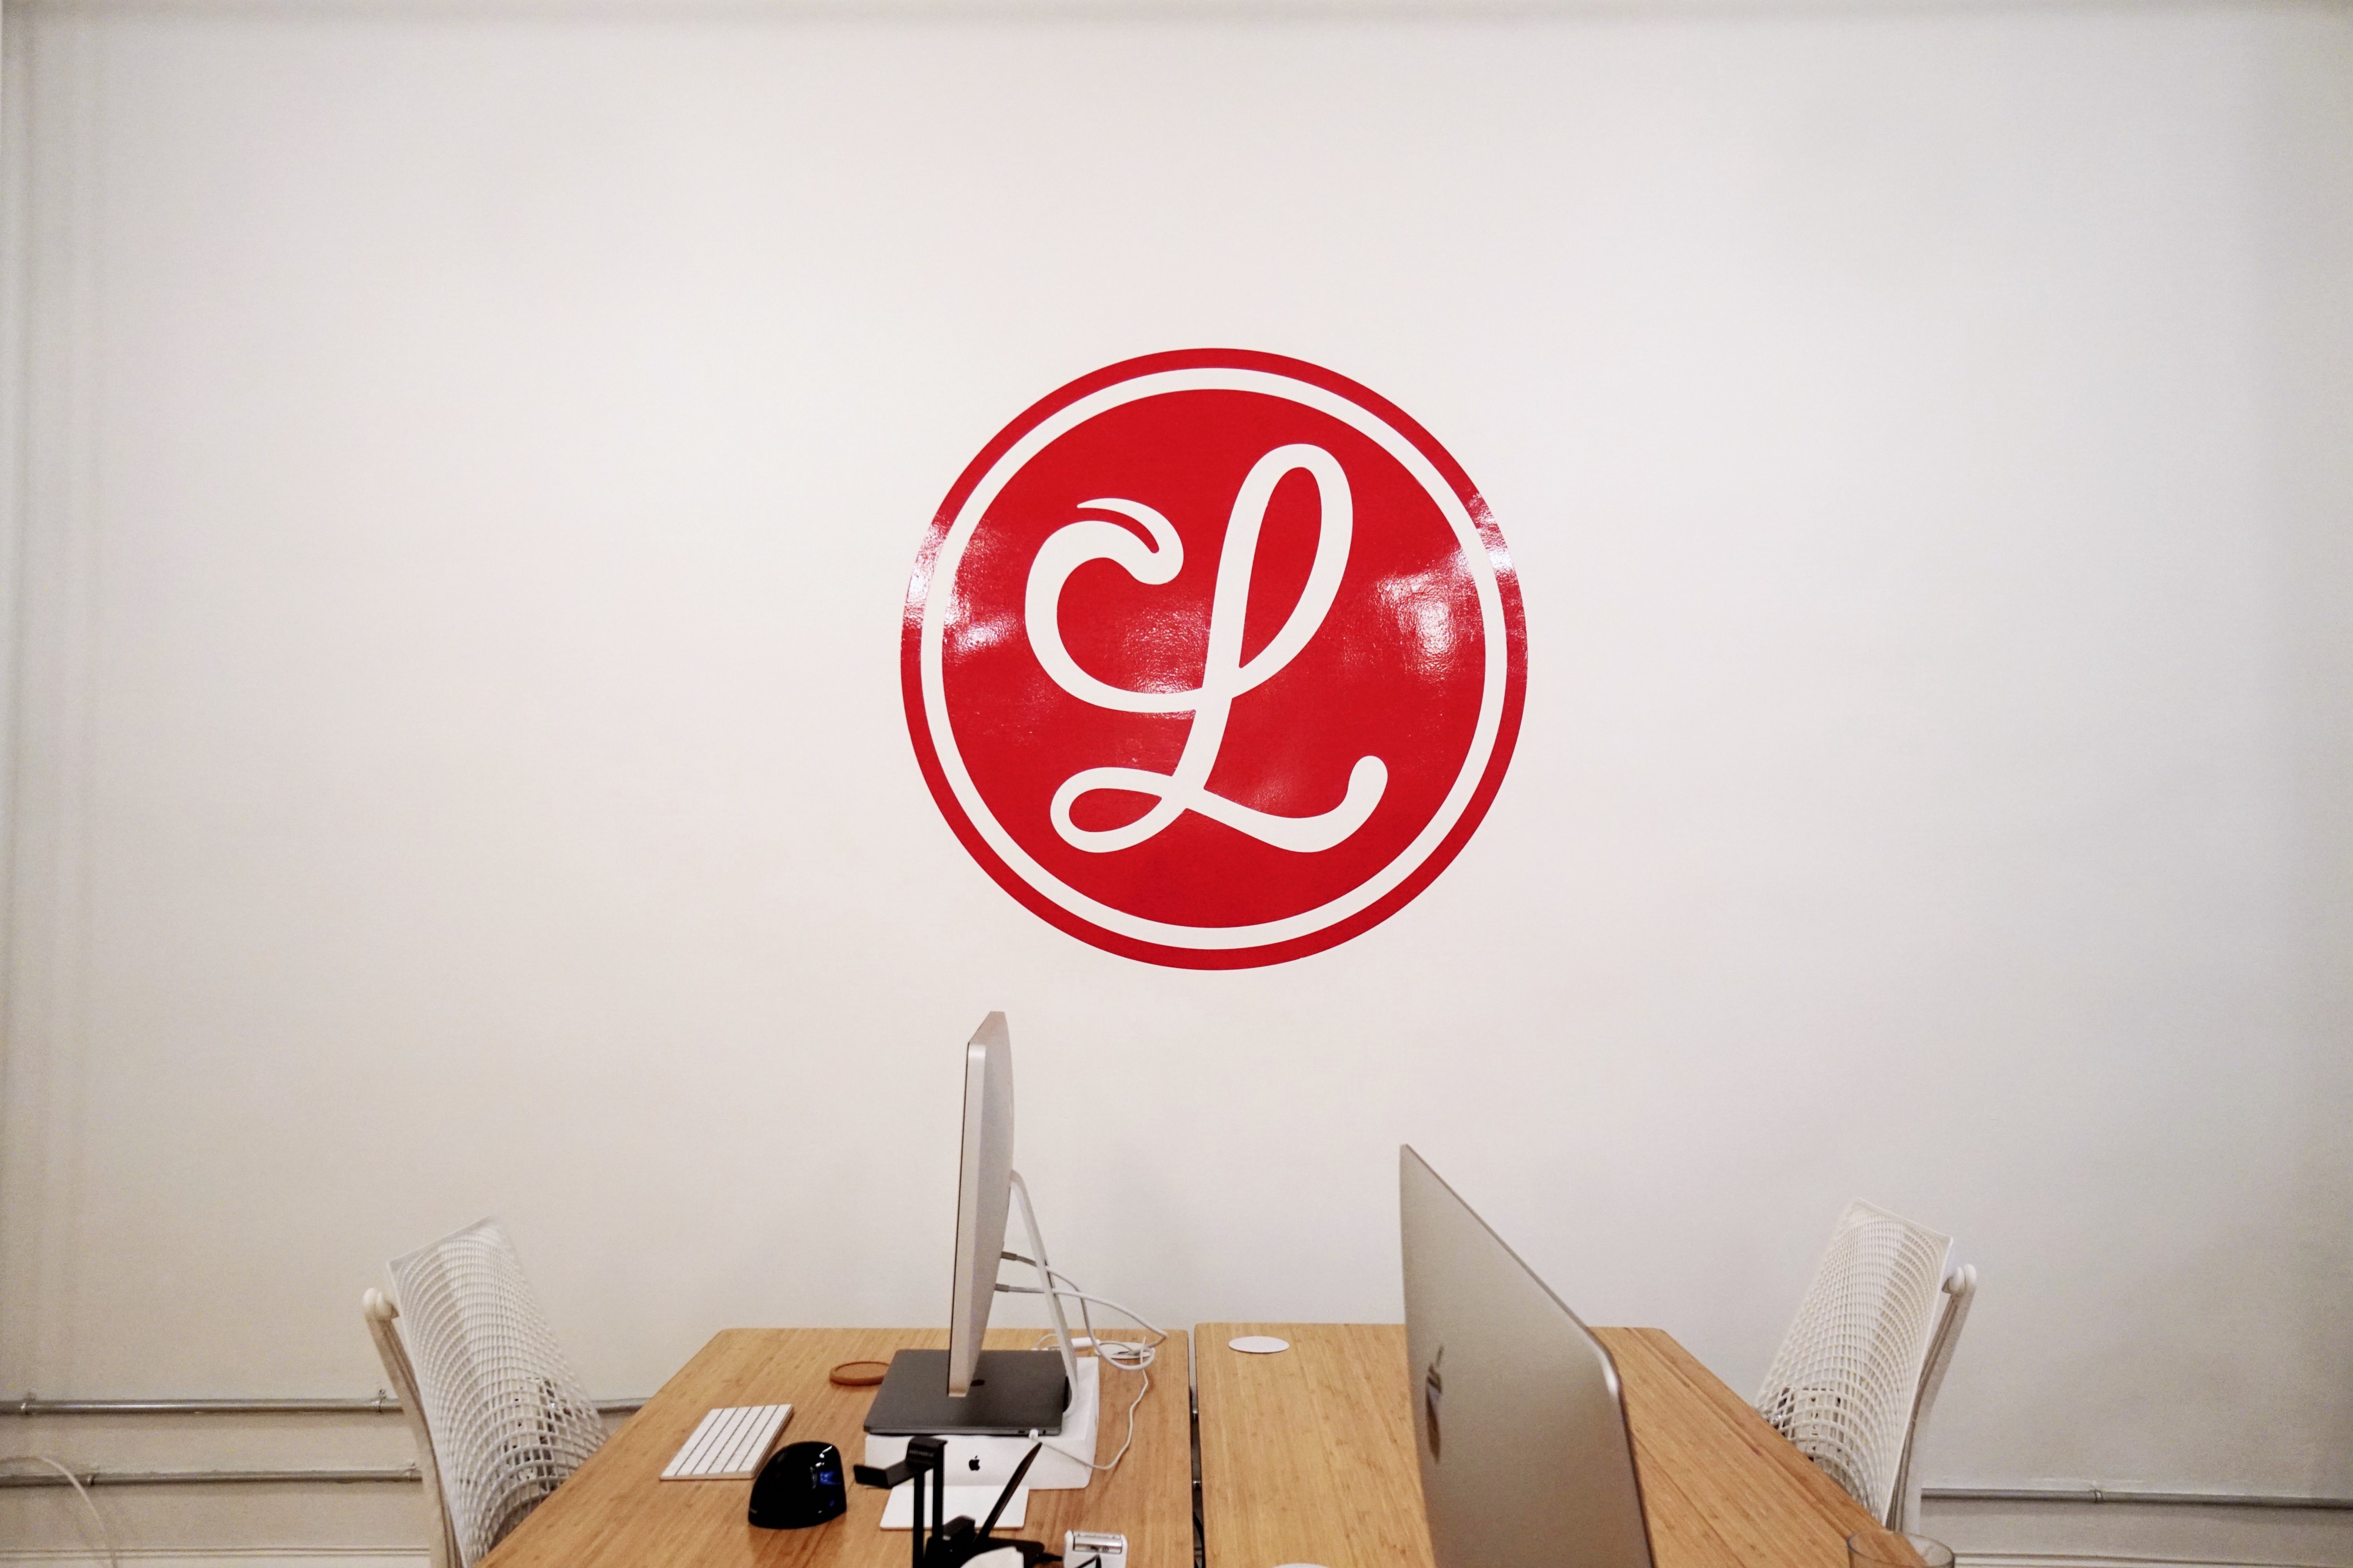 A photo of desks at Lickability, and a wall decal of the Lickability logo.